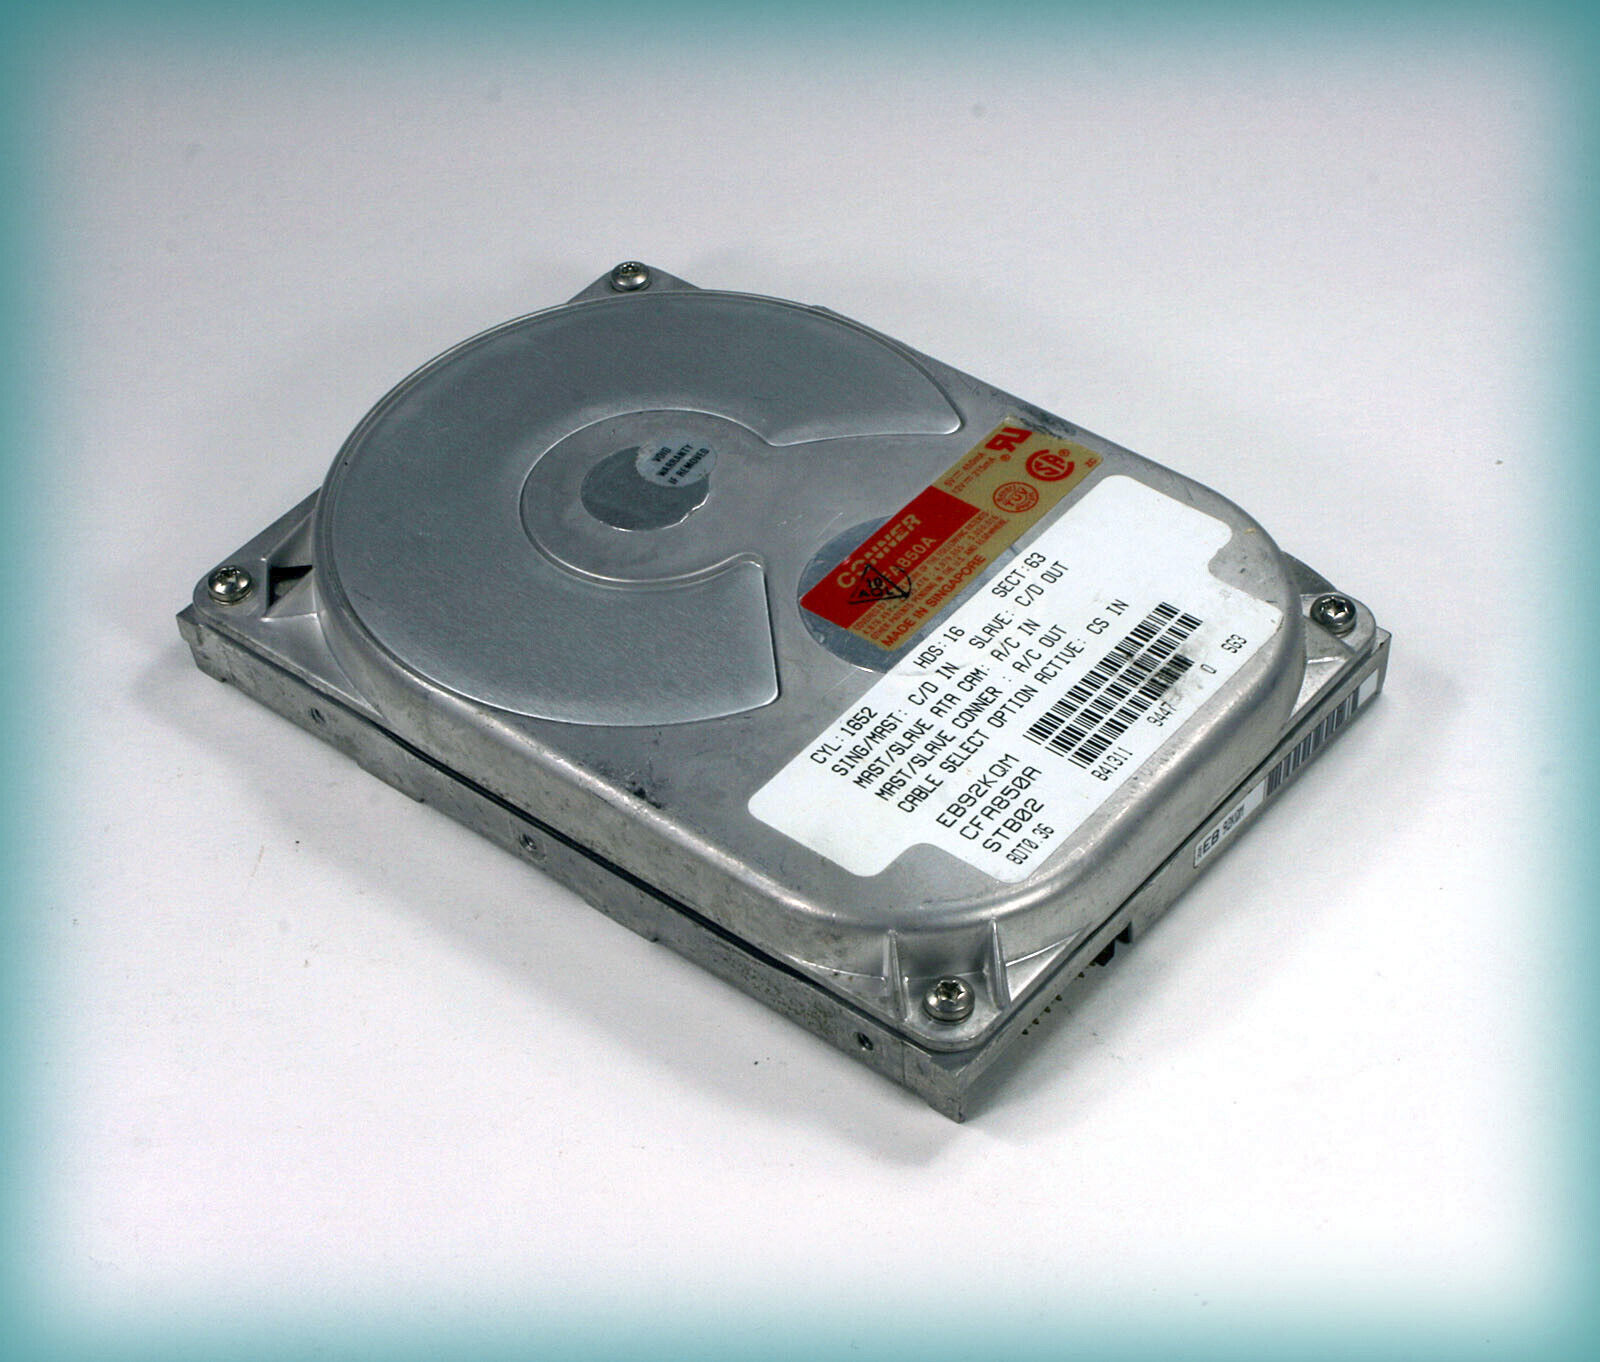 Vintage Conner CFA850A Hard Drive 850MB IDE — Boots to DOS, Bad Sectors